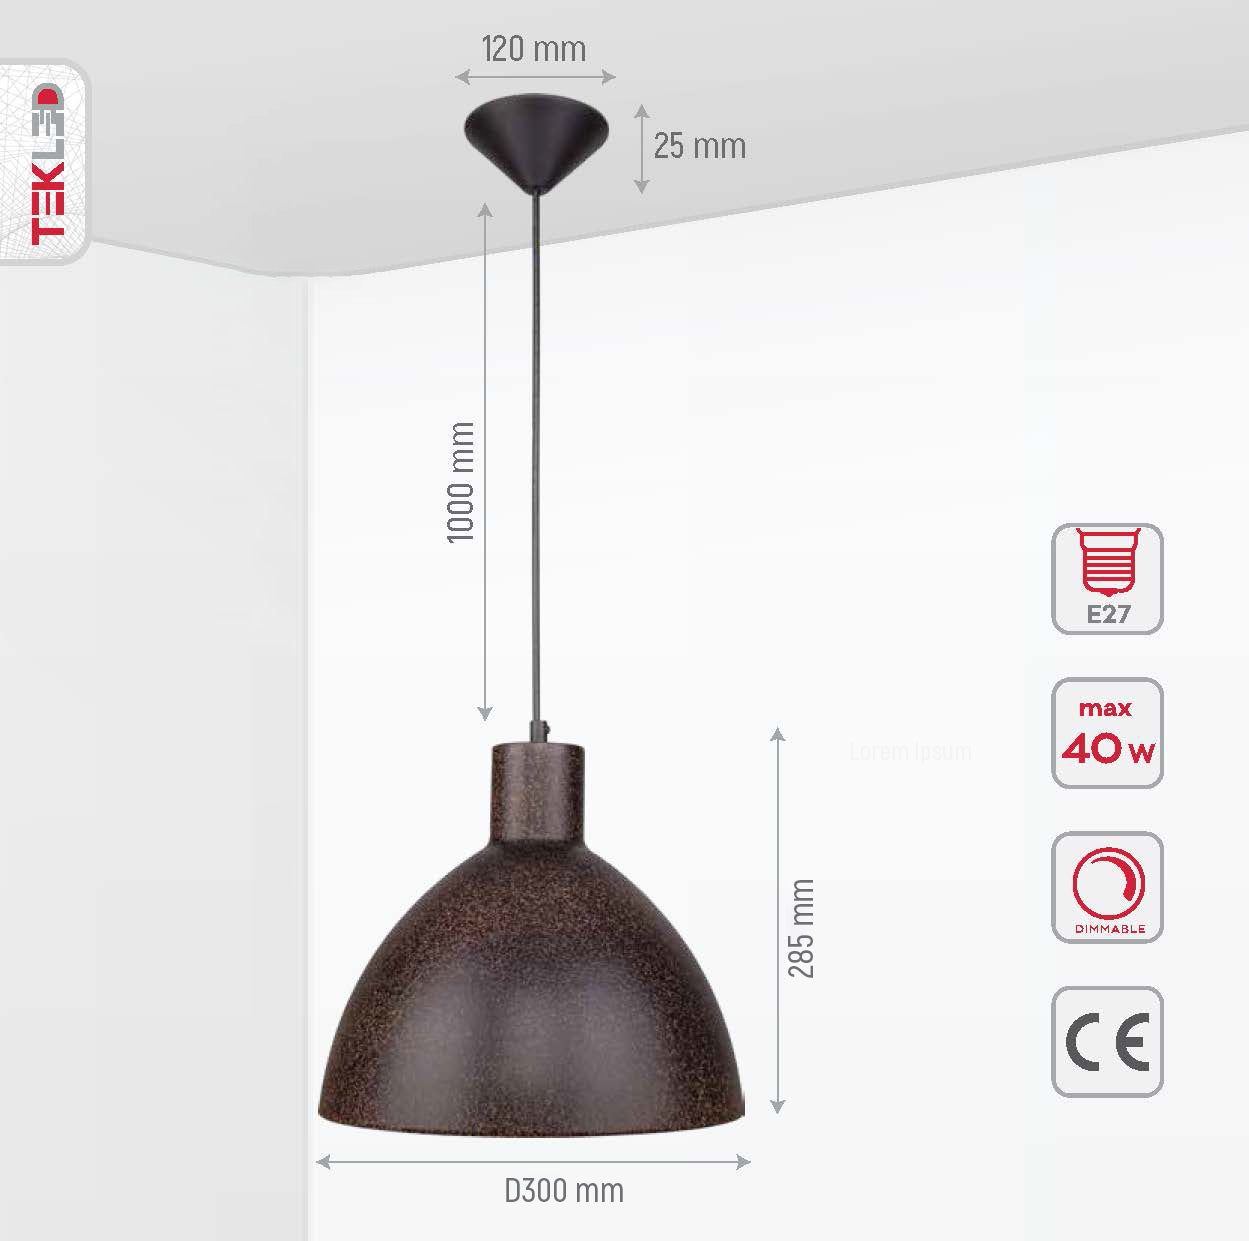 Product dimensions of rusty brown metal dome flat pendant light with e27 fitting